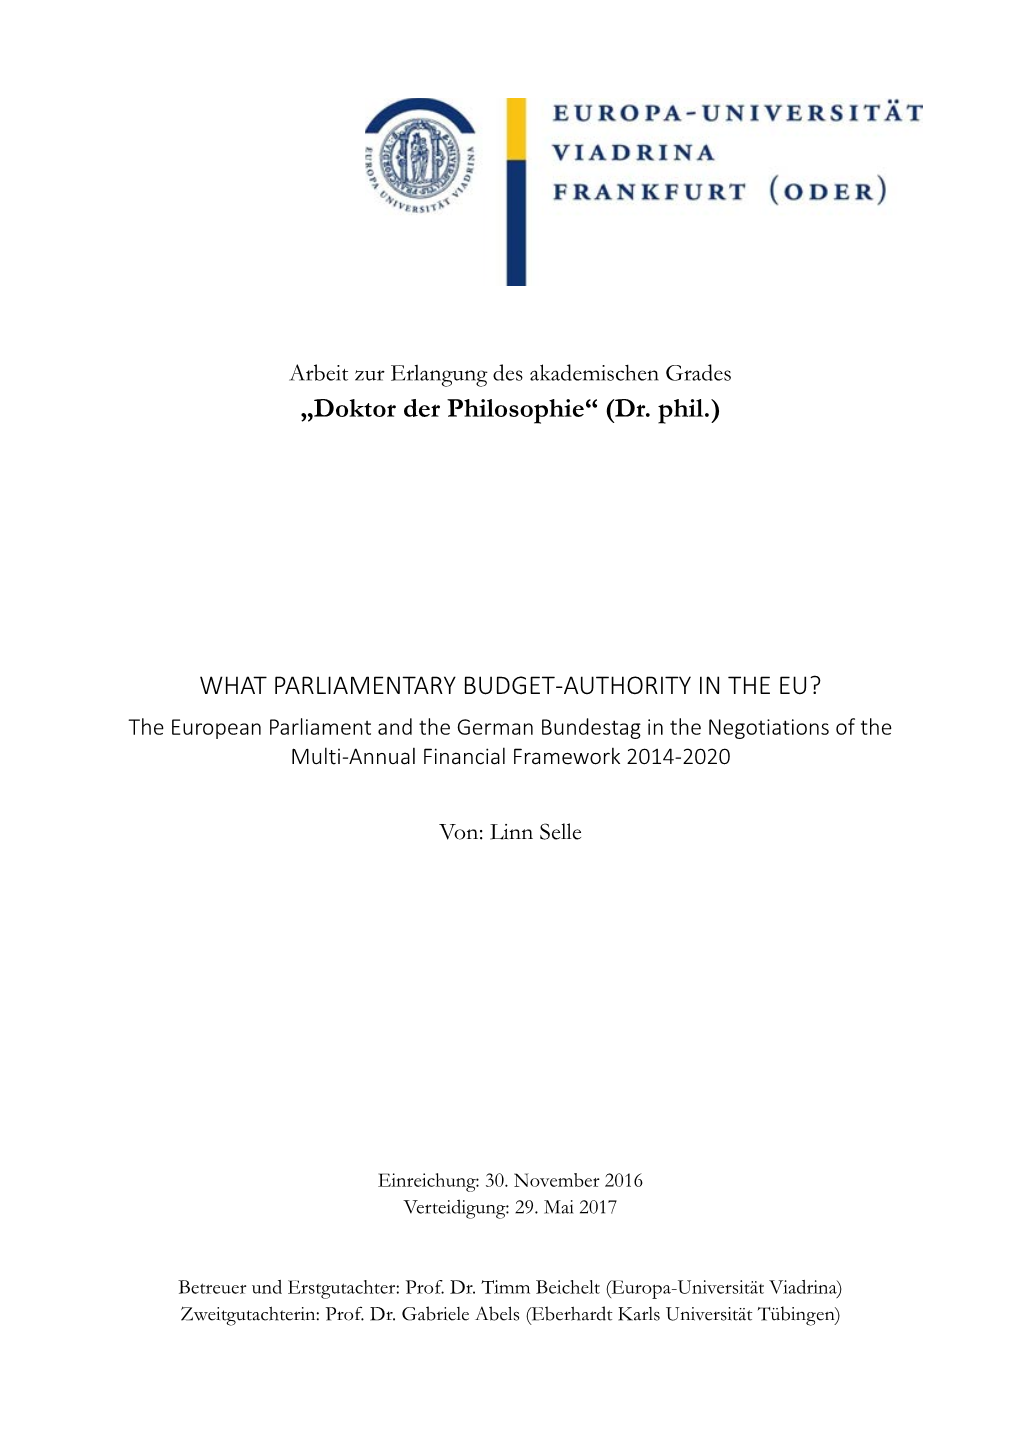 What Parliamentary Budget Authority in the European Union?